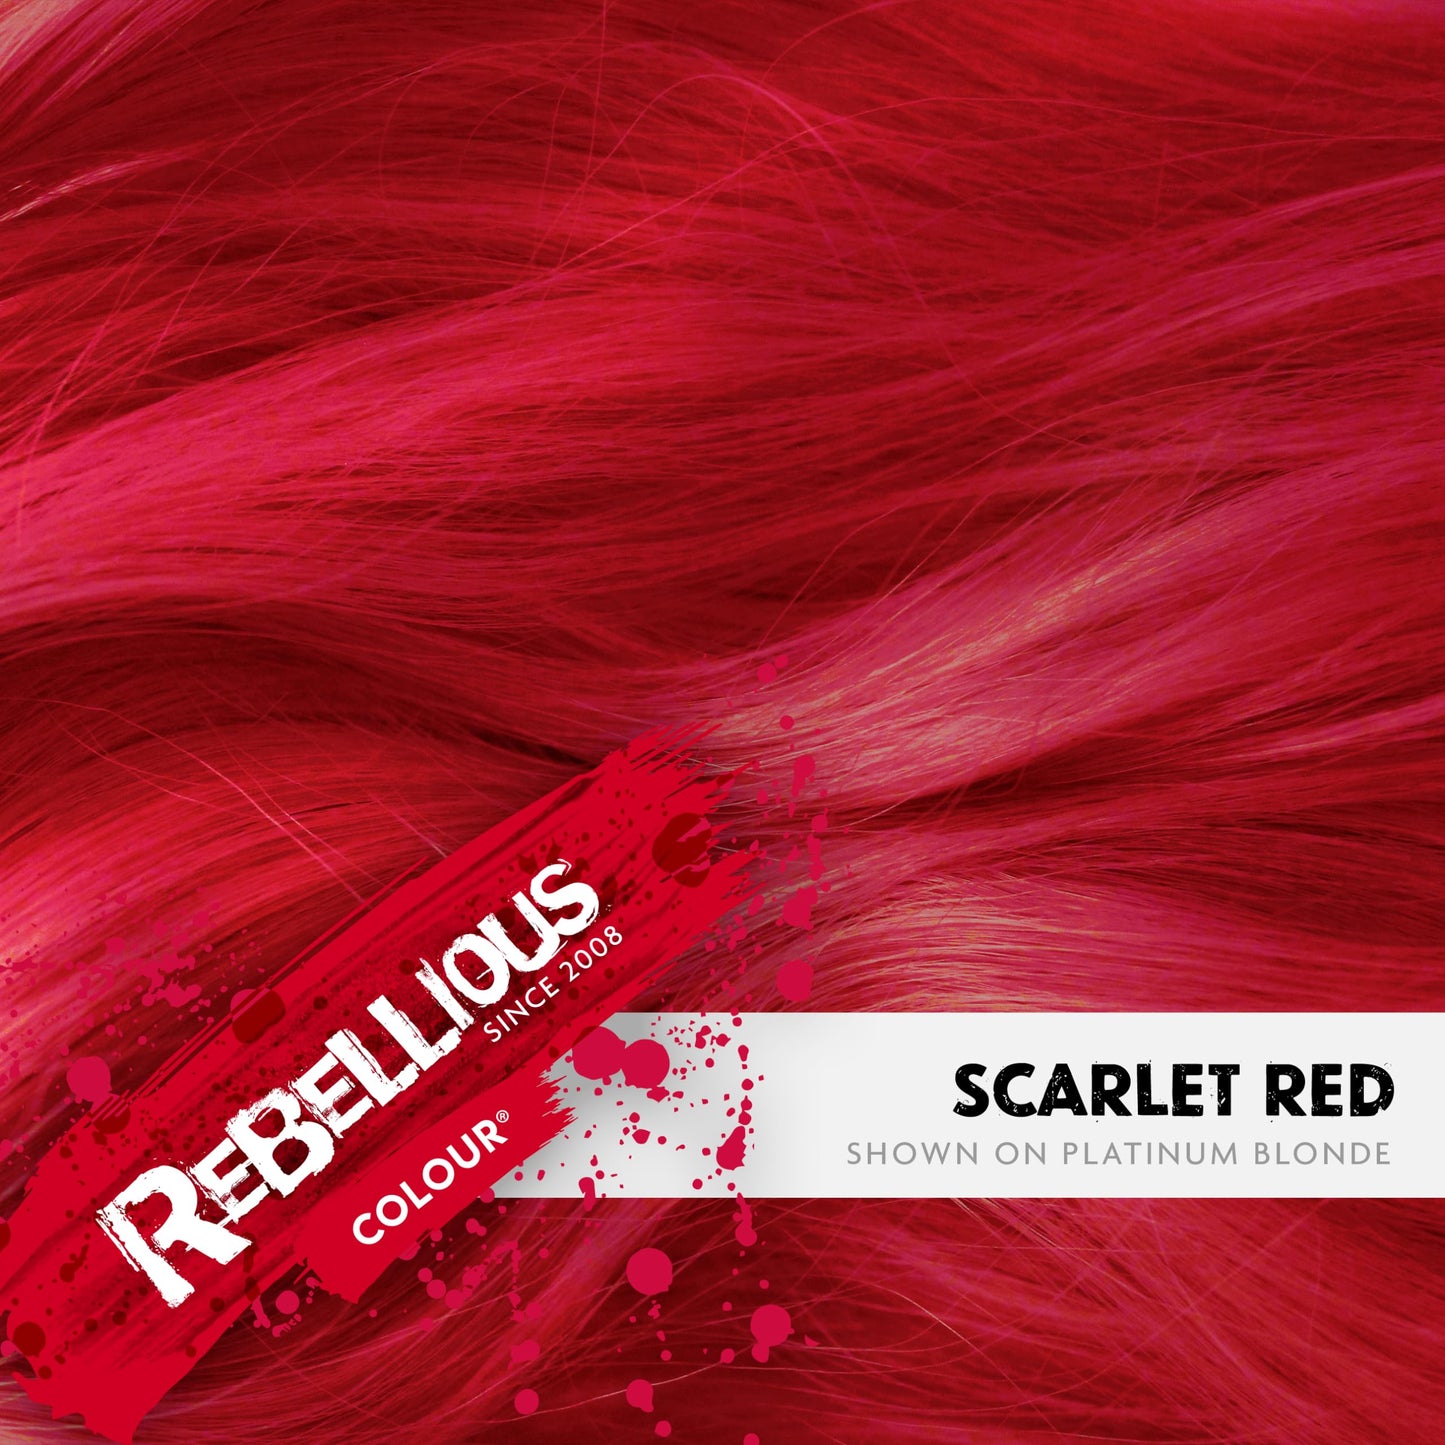 Paint Glow Rebellious Colours Semi-Permanent Conditioning Hair Dye 70ml-Scarlet Red